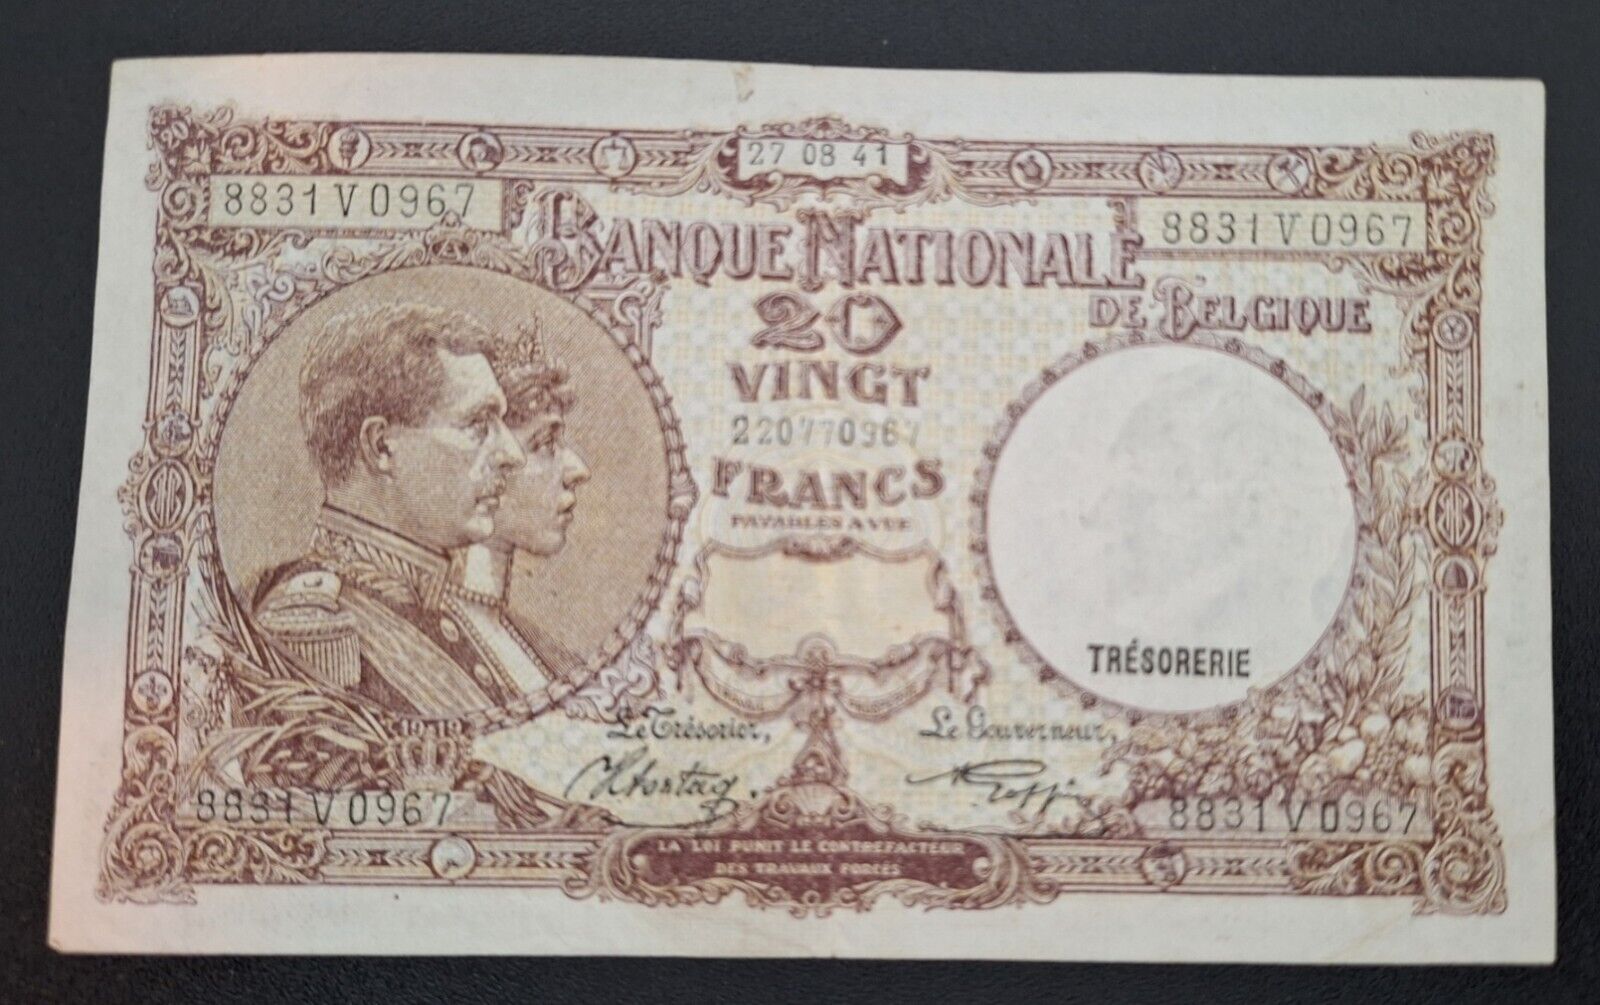 Belgium - 1941/3 ,20 Francs Banknote in Very Fine Condition -P 49